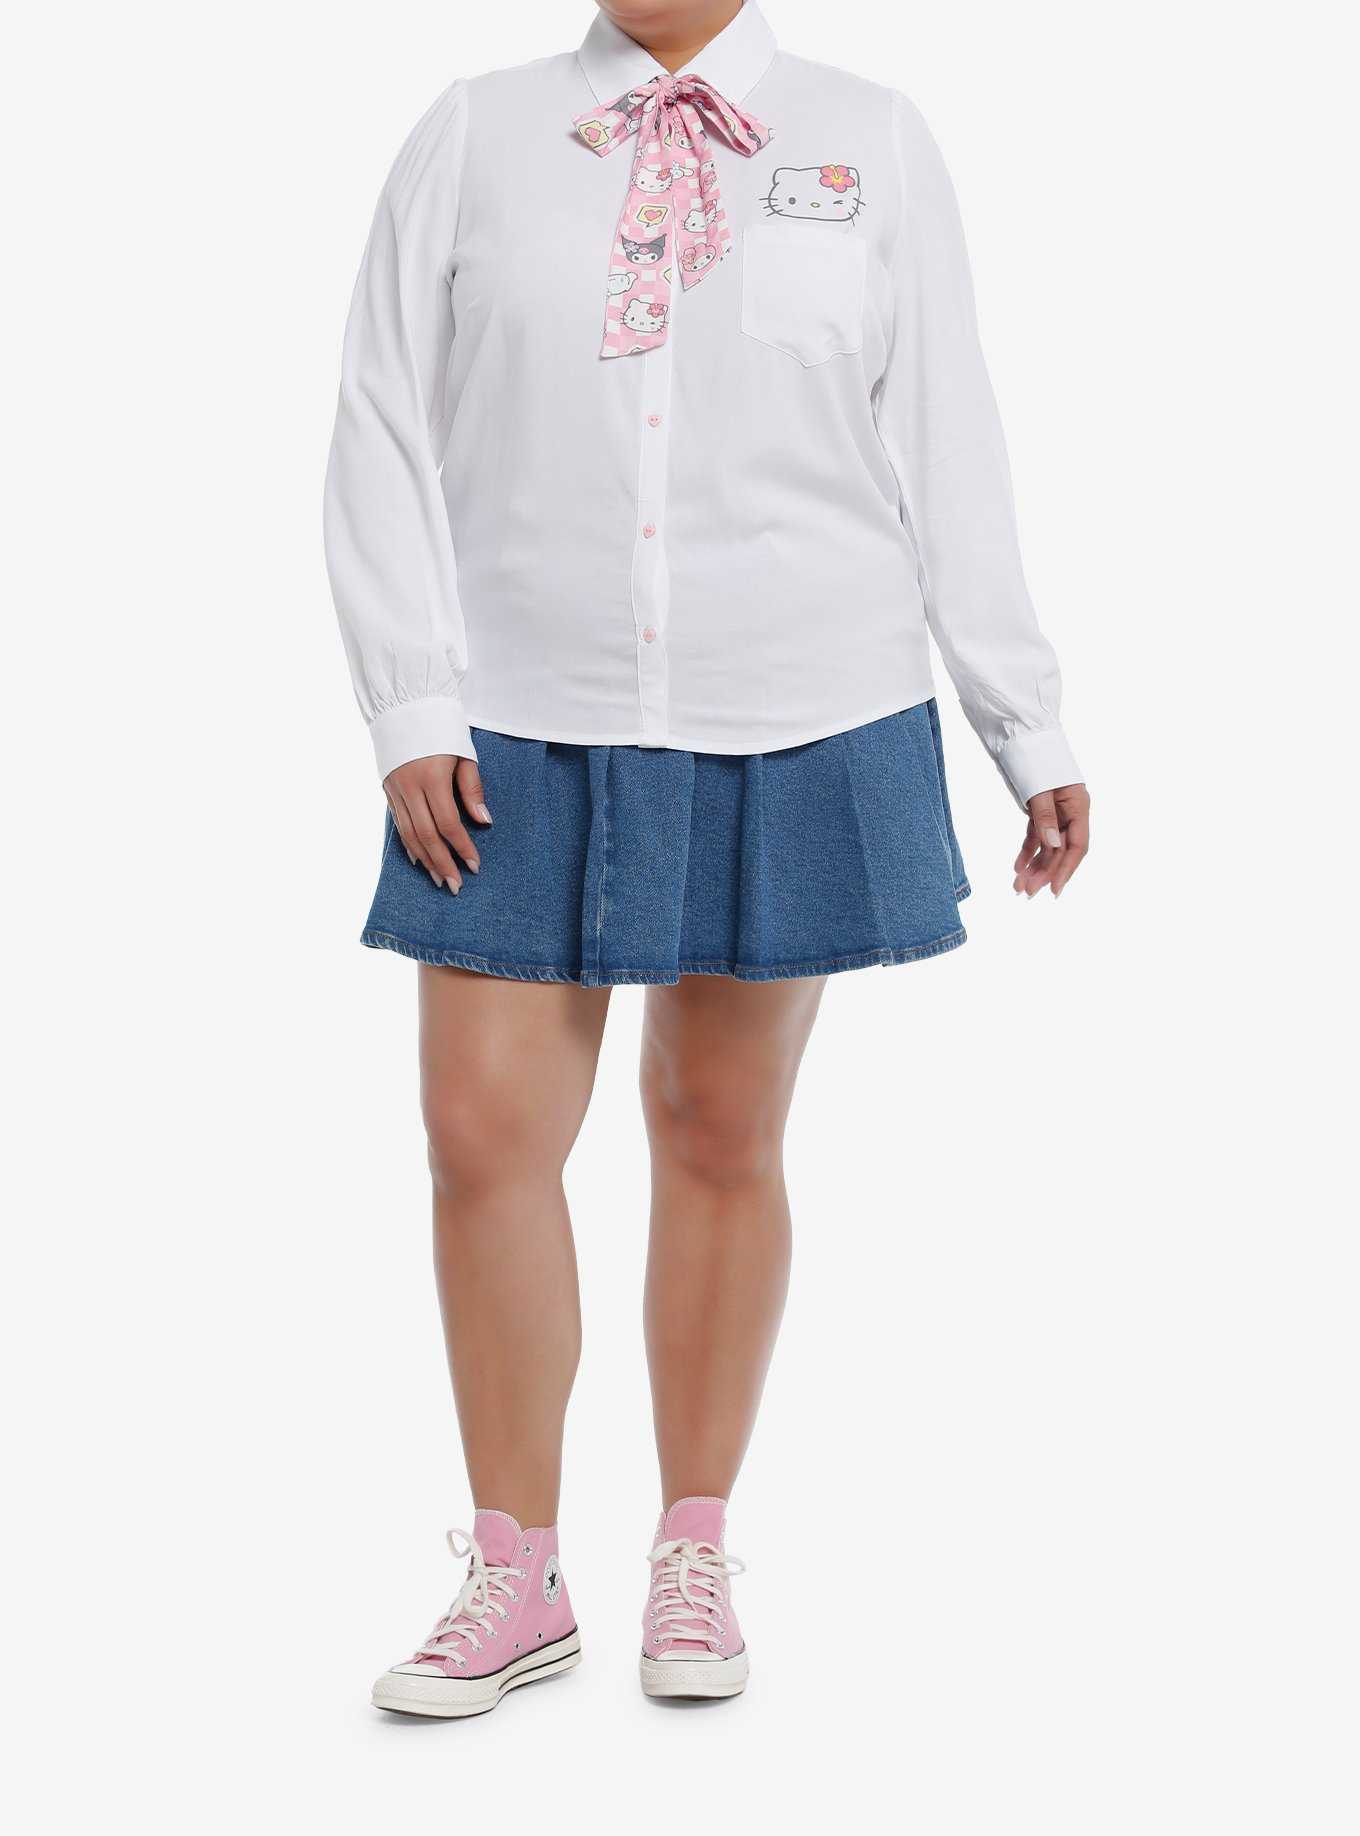 Hello Kitty And Friends Kogyaru Girls Woven Long-Sleeve Top Plus Size, , hi-res